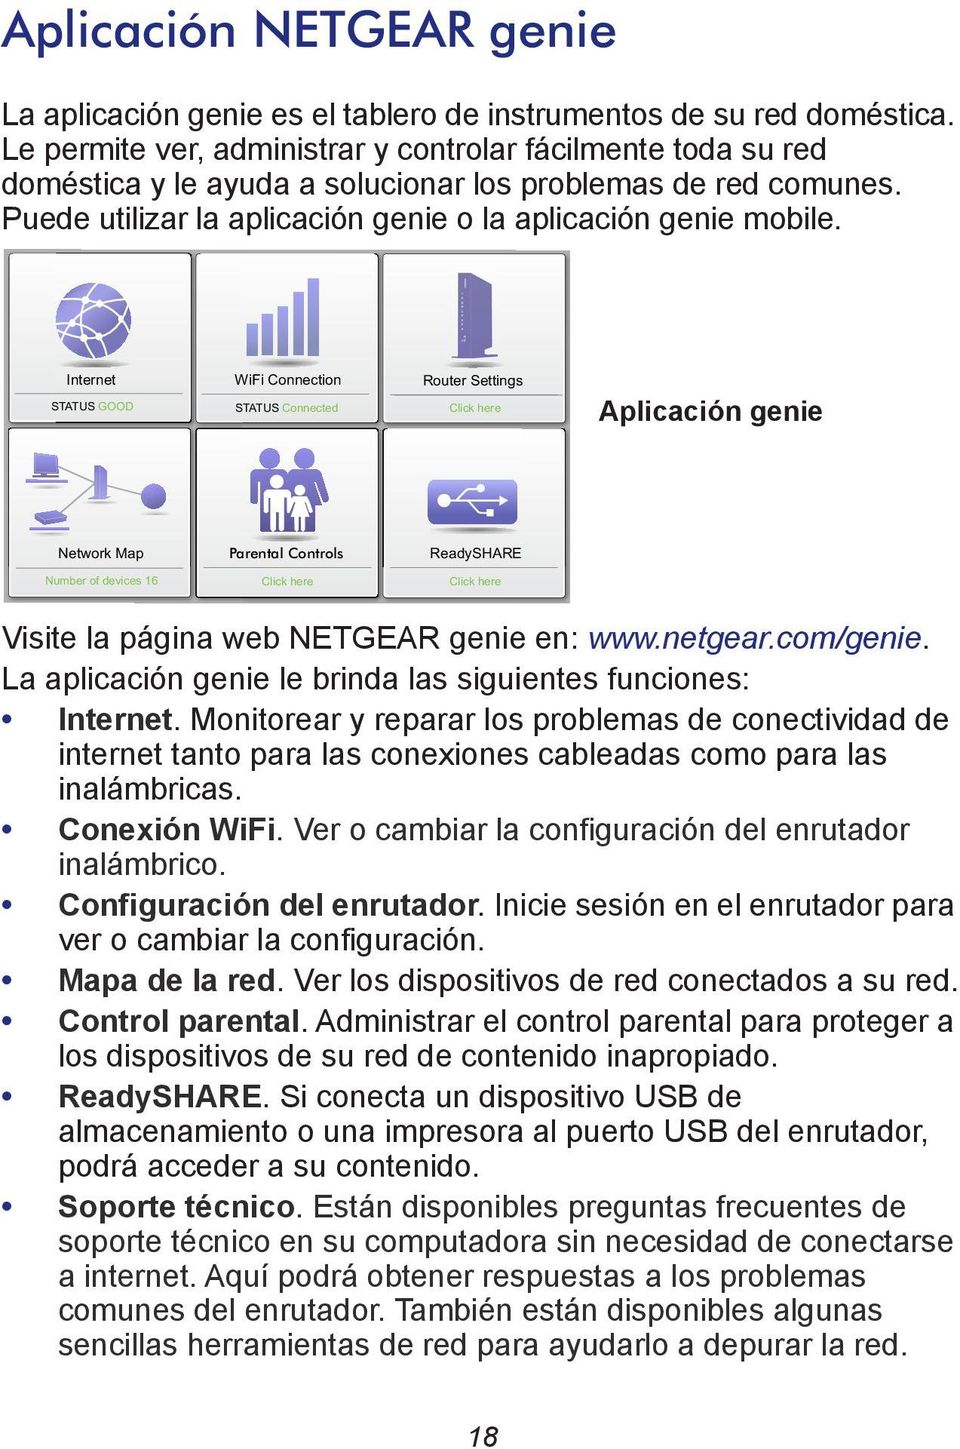 Internet STATUS GOOD WiFi Connection STATUS Connected Router Settings Click here Aplicación genie Network Map Parental Controls ReadySHARE Number of devices 16 Click here Click here Visite la página